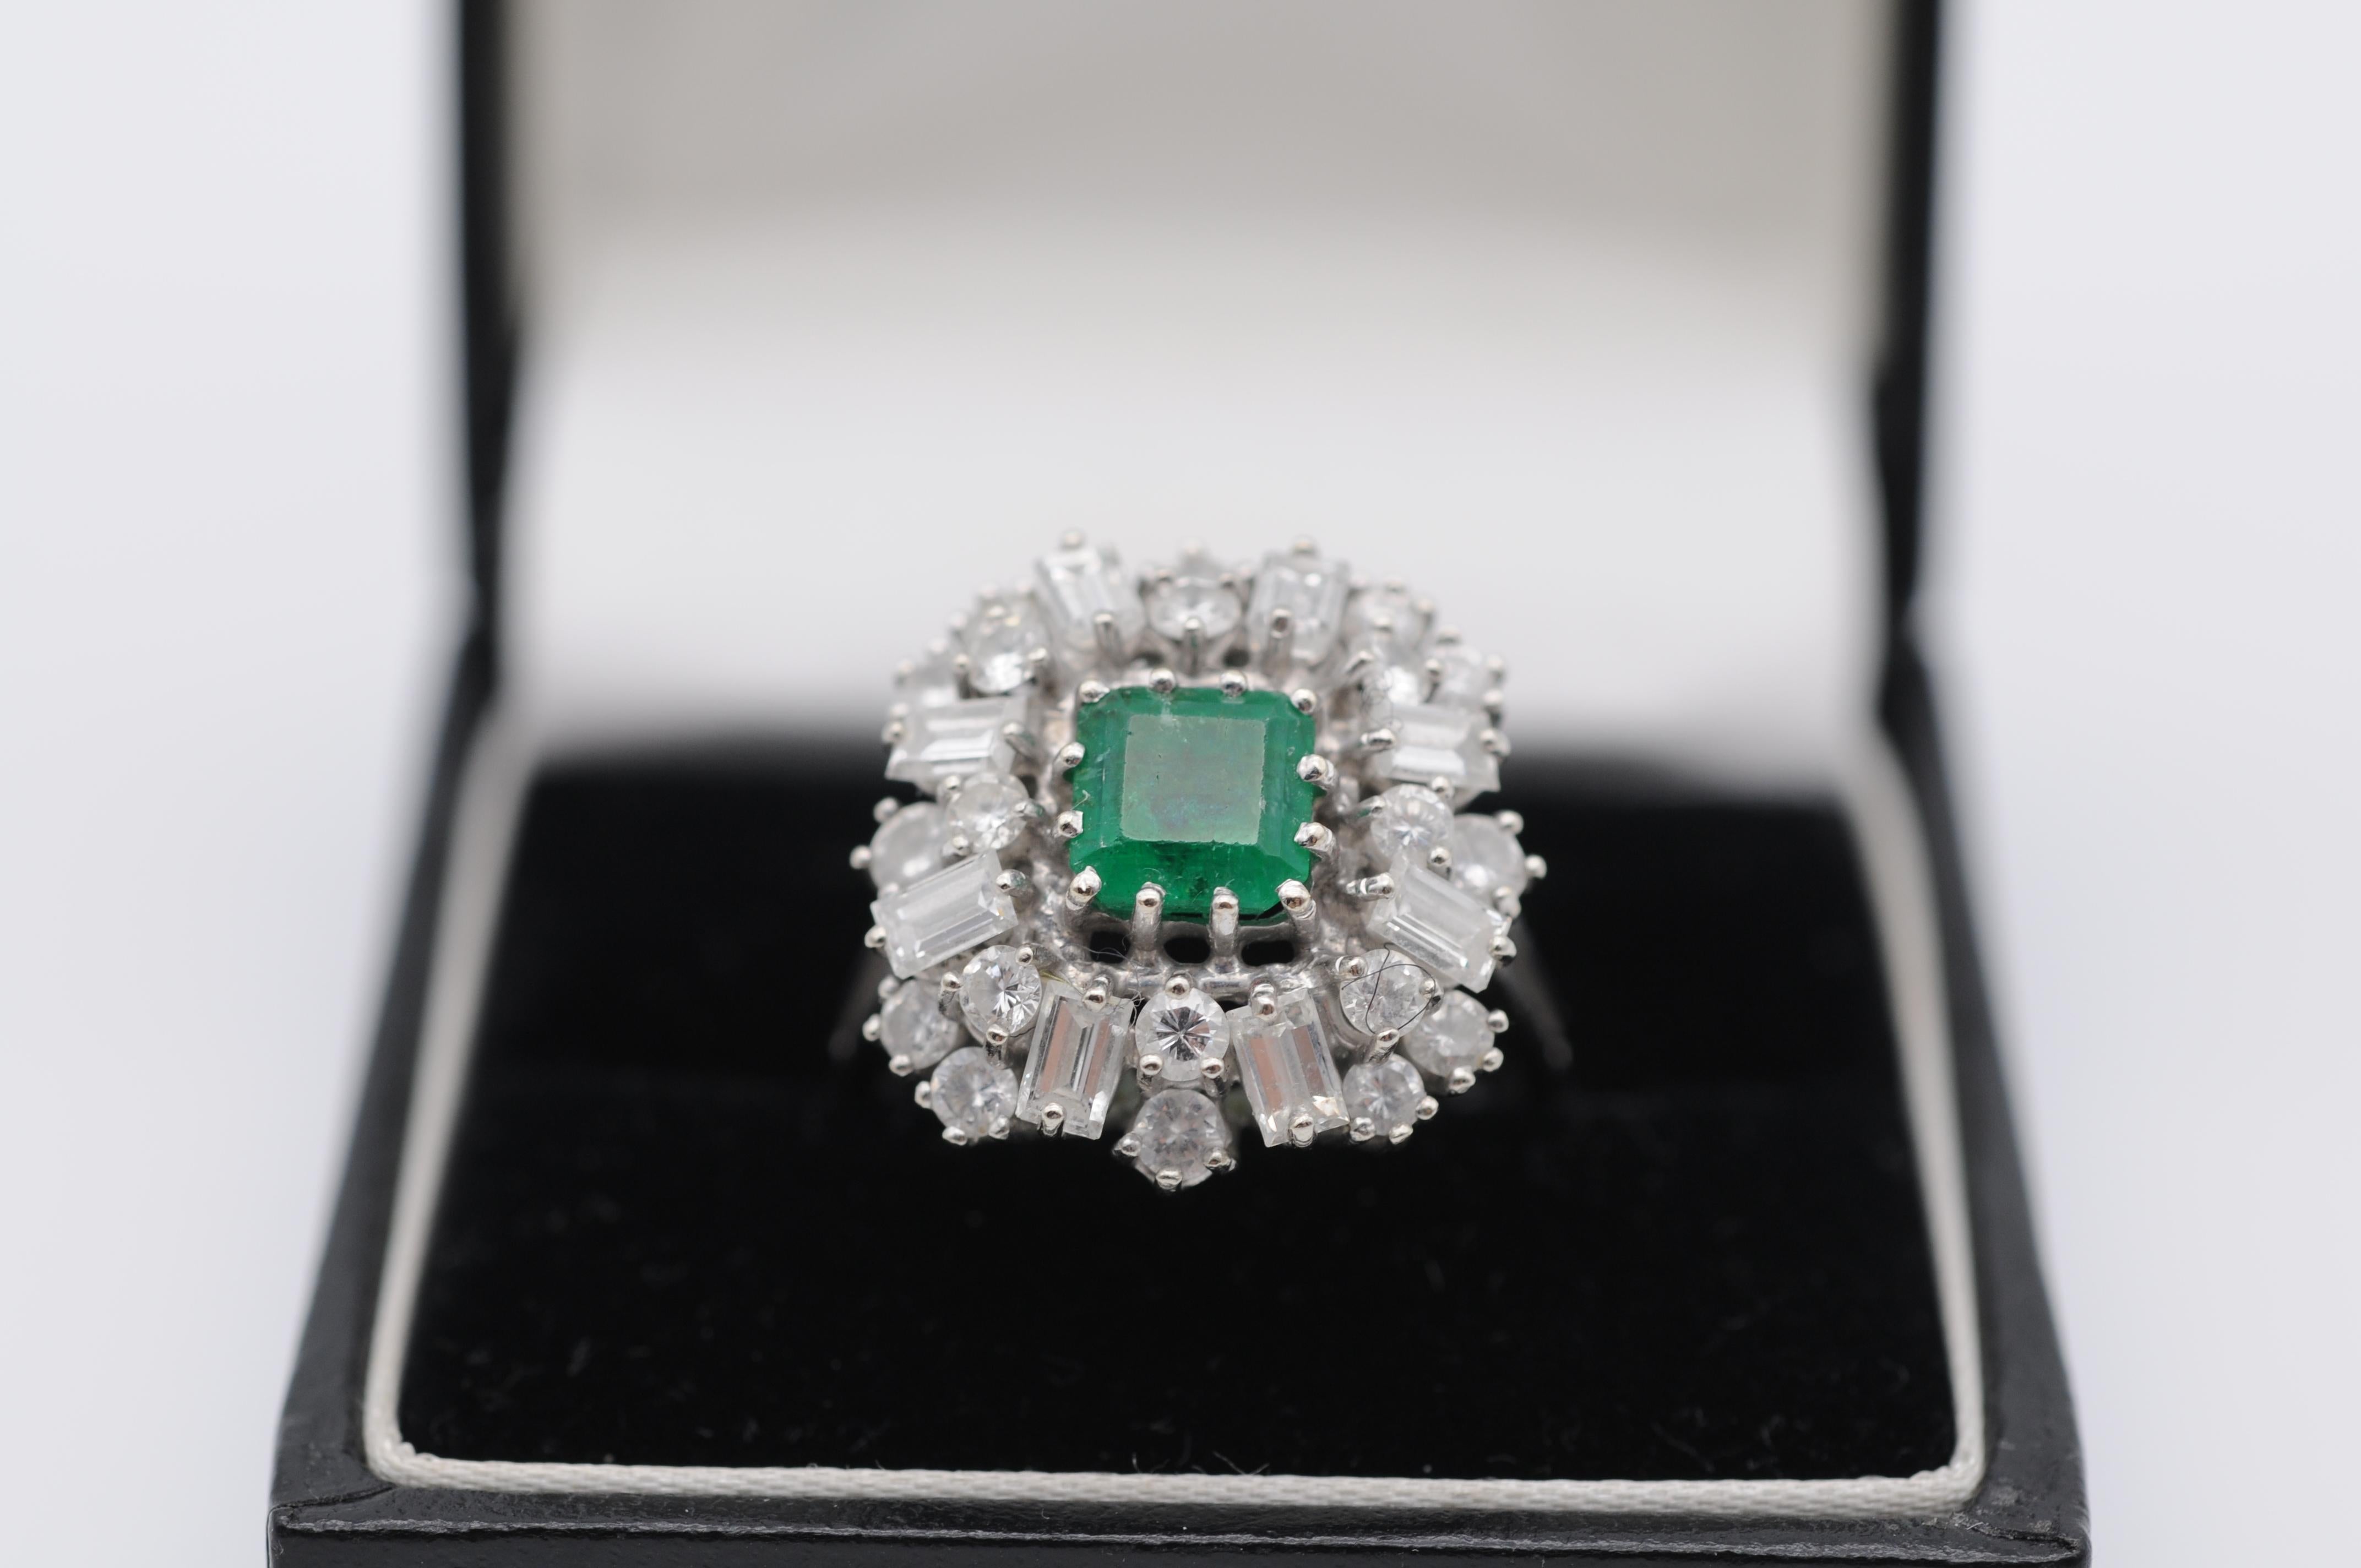 This exquisite emerald ring is a true symbol of luxury and refinement. Crafted from 14k white gold, this ring band showcases a breathtaking emerald at its center, weighing approximately 1.32 carats. The emerald boasts a gorgeous table cut that adds